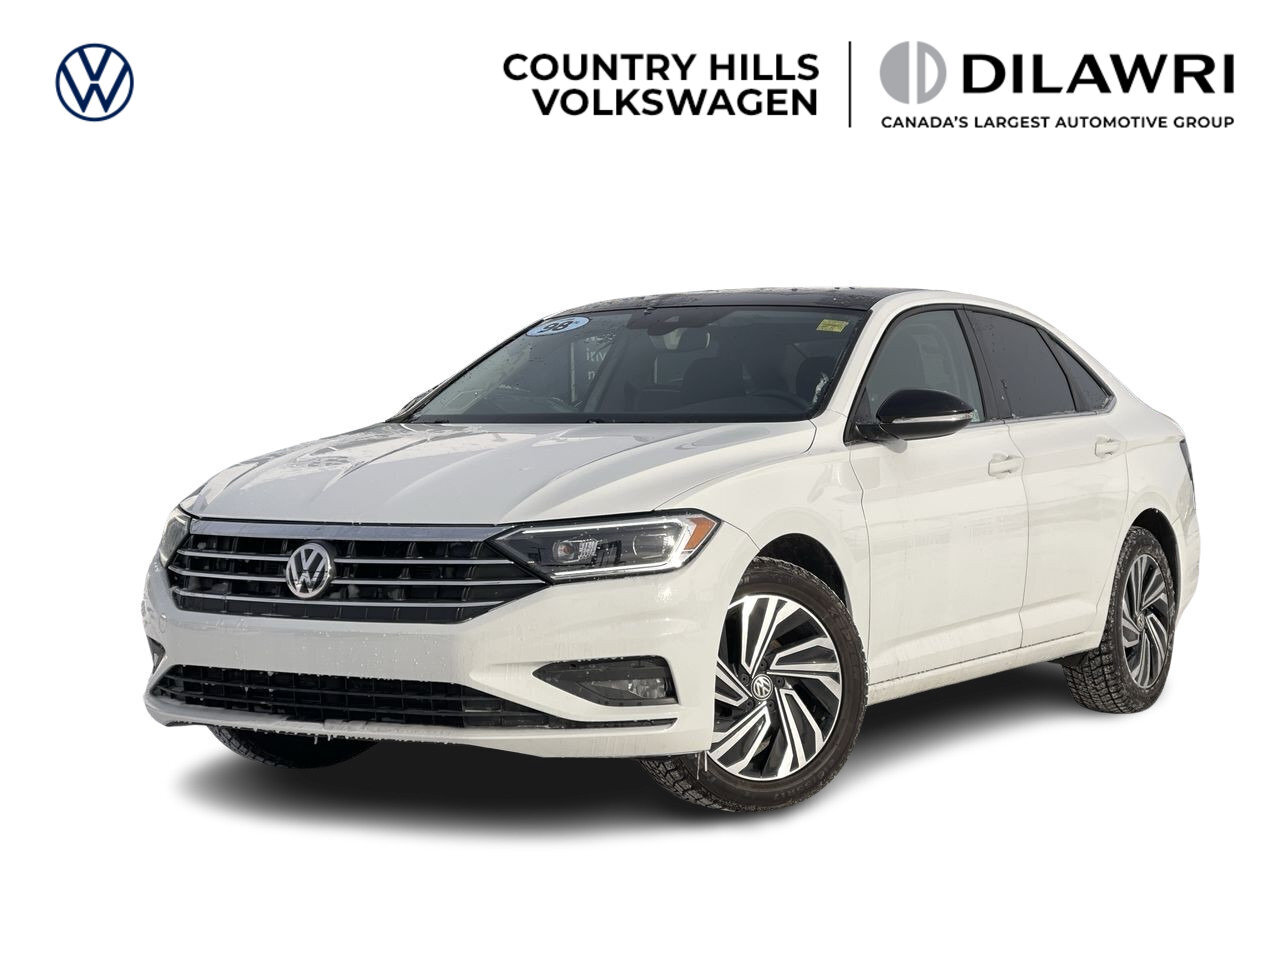 2020 Volkswagen Jetta Execline 1.4L TSI Locally Owned / 